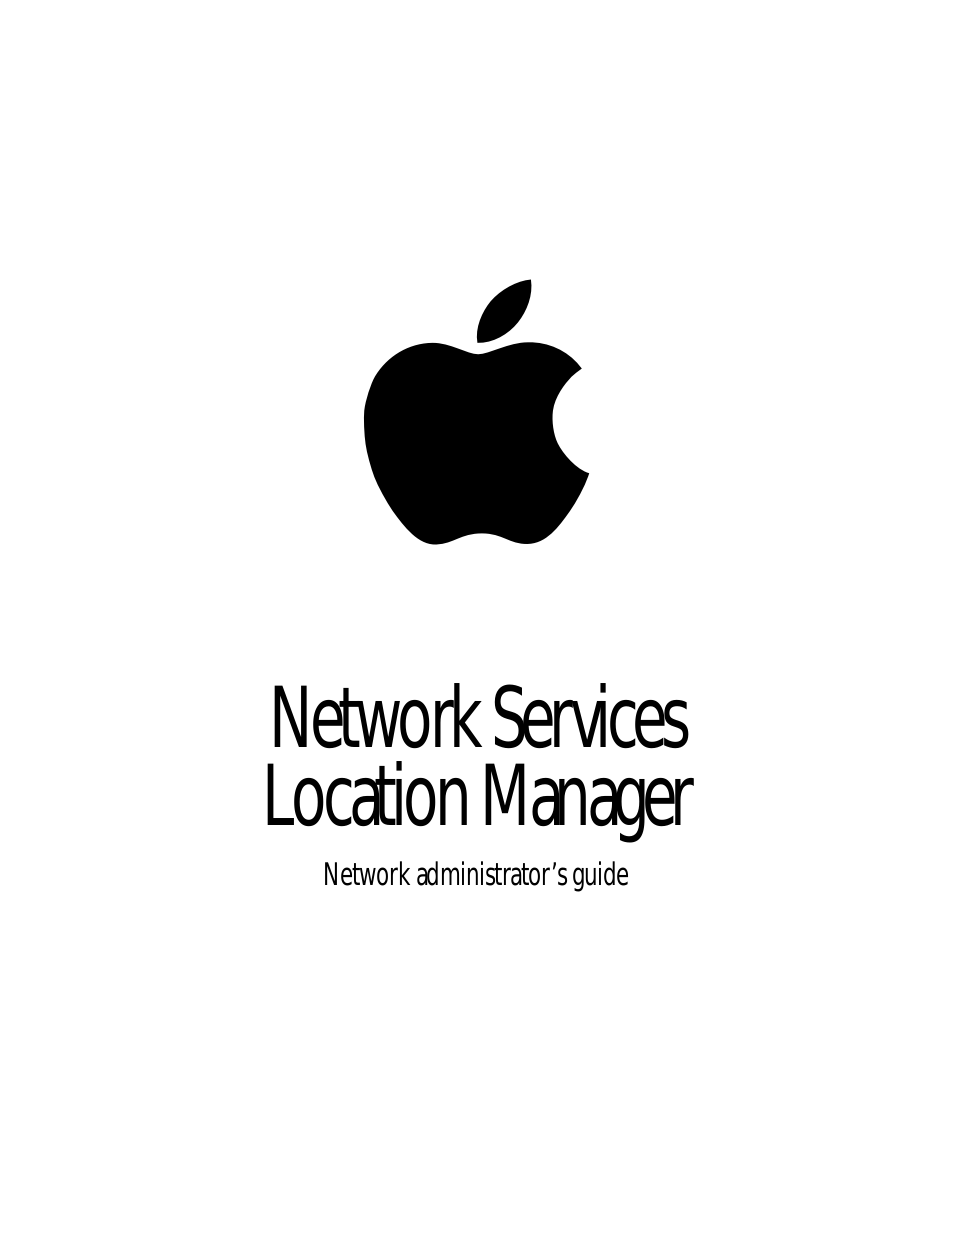 Network Services Location Manager Network